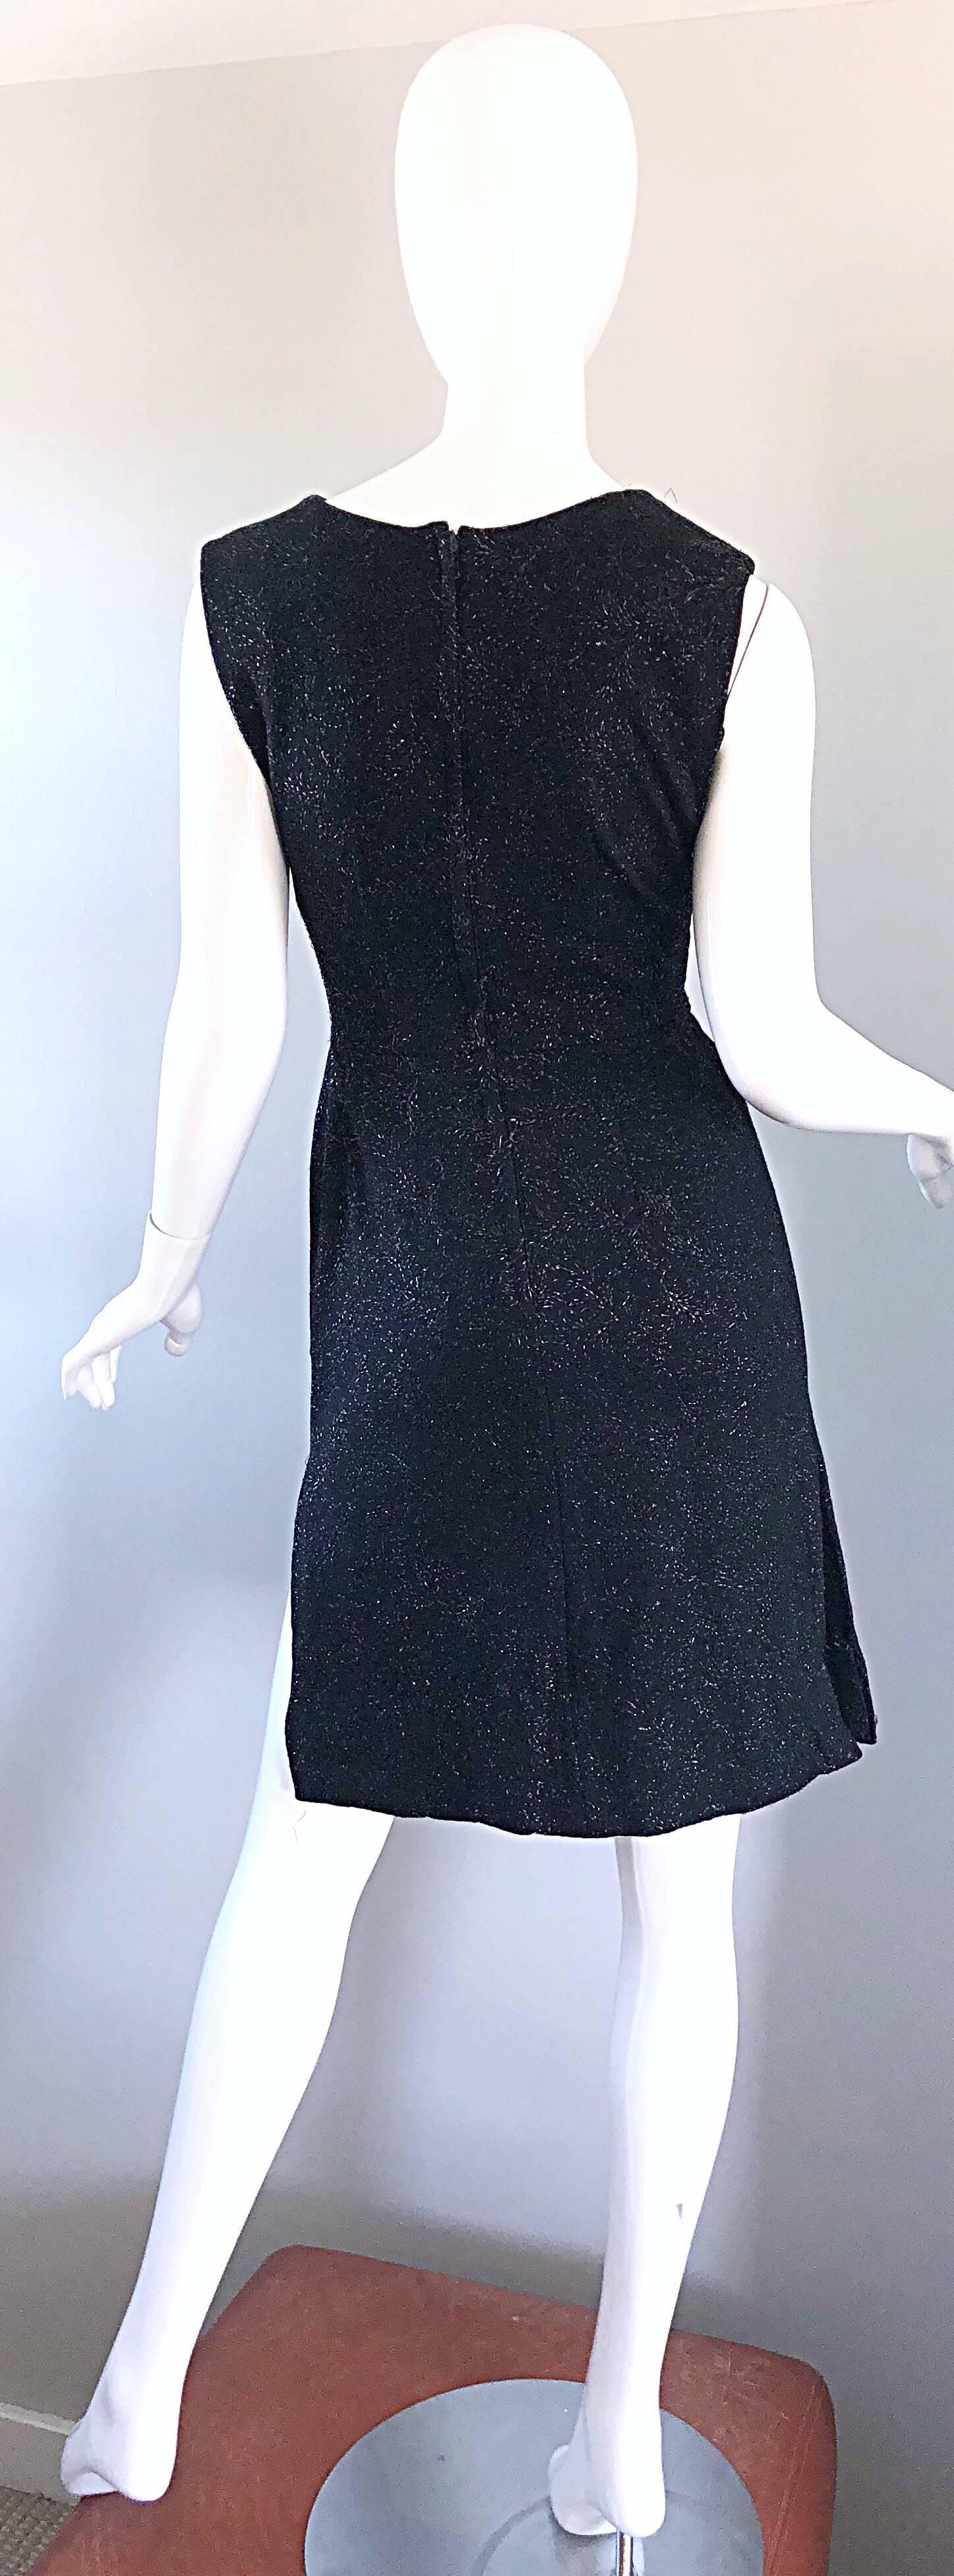 Vintage Henry Rosenfeld 1960s Black Metallic Hand Woven 60s Vintage Sheath Dress In Excellent Condition For Sale In San Diego, CA